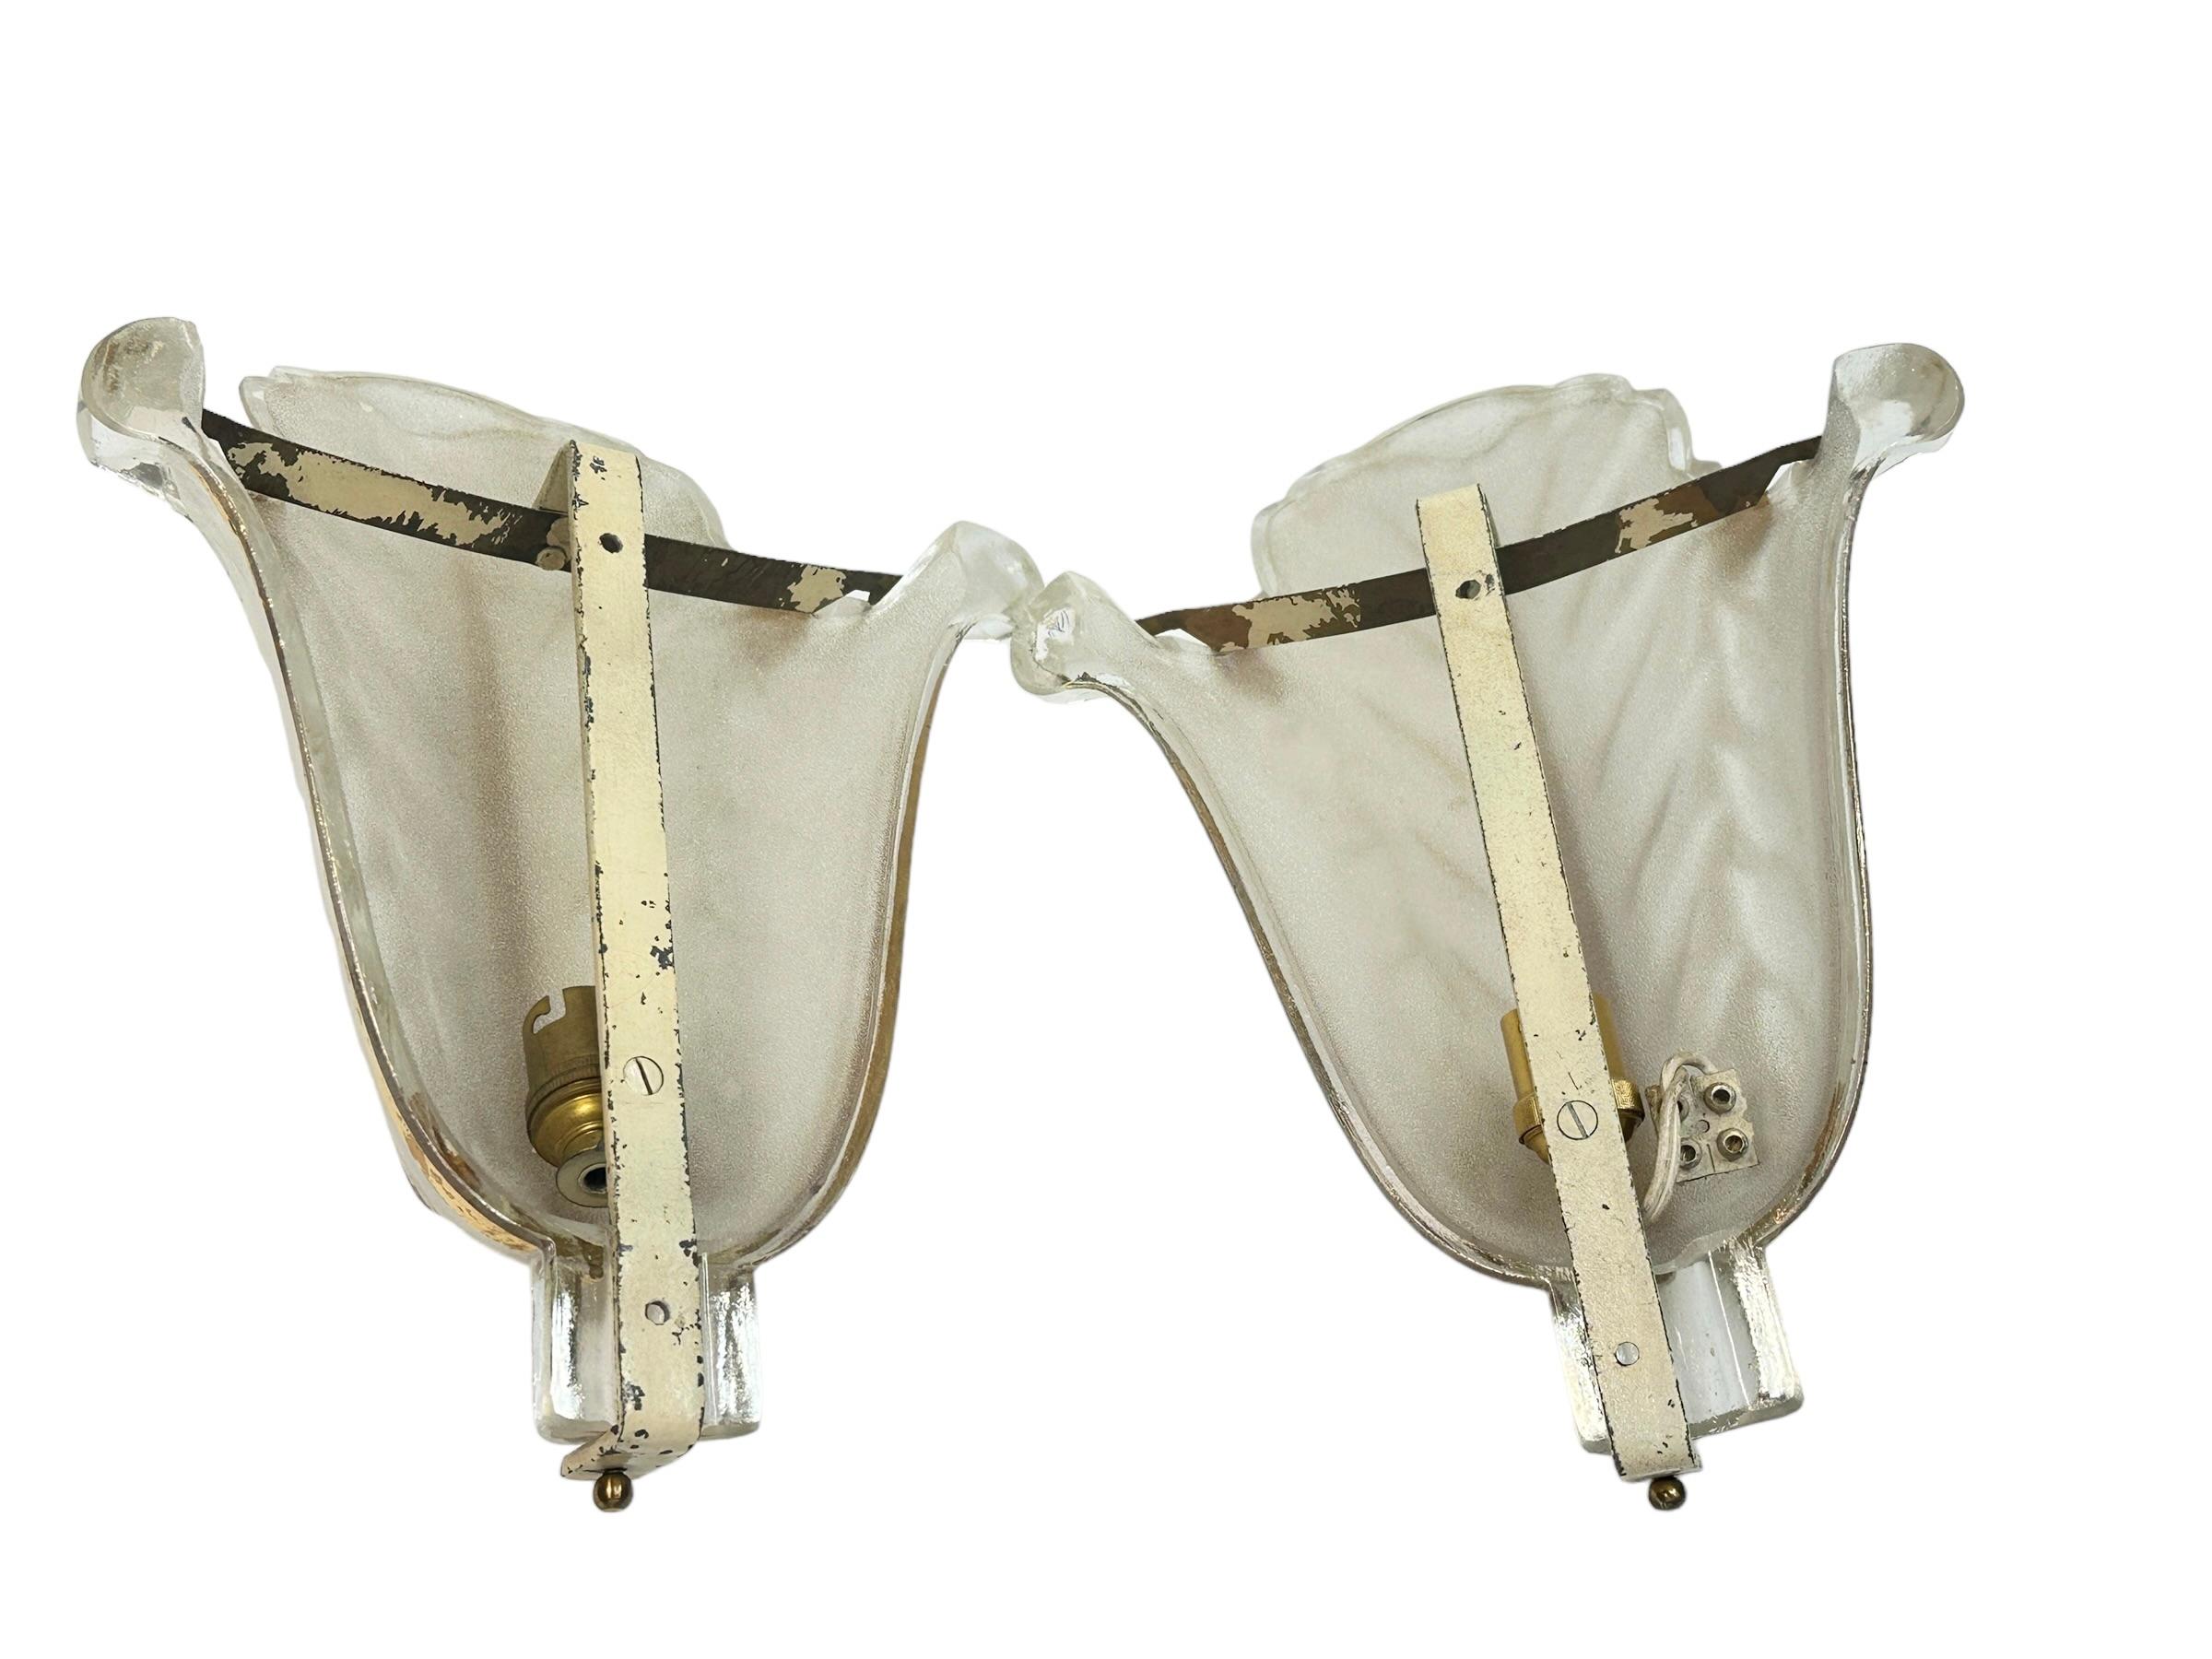 Pair of Jean Gauthier Art Deco Glass Sconces 1930s French For Sale 2